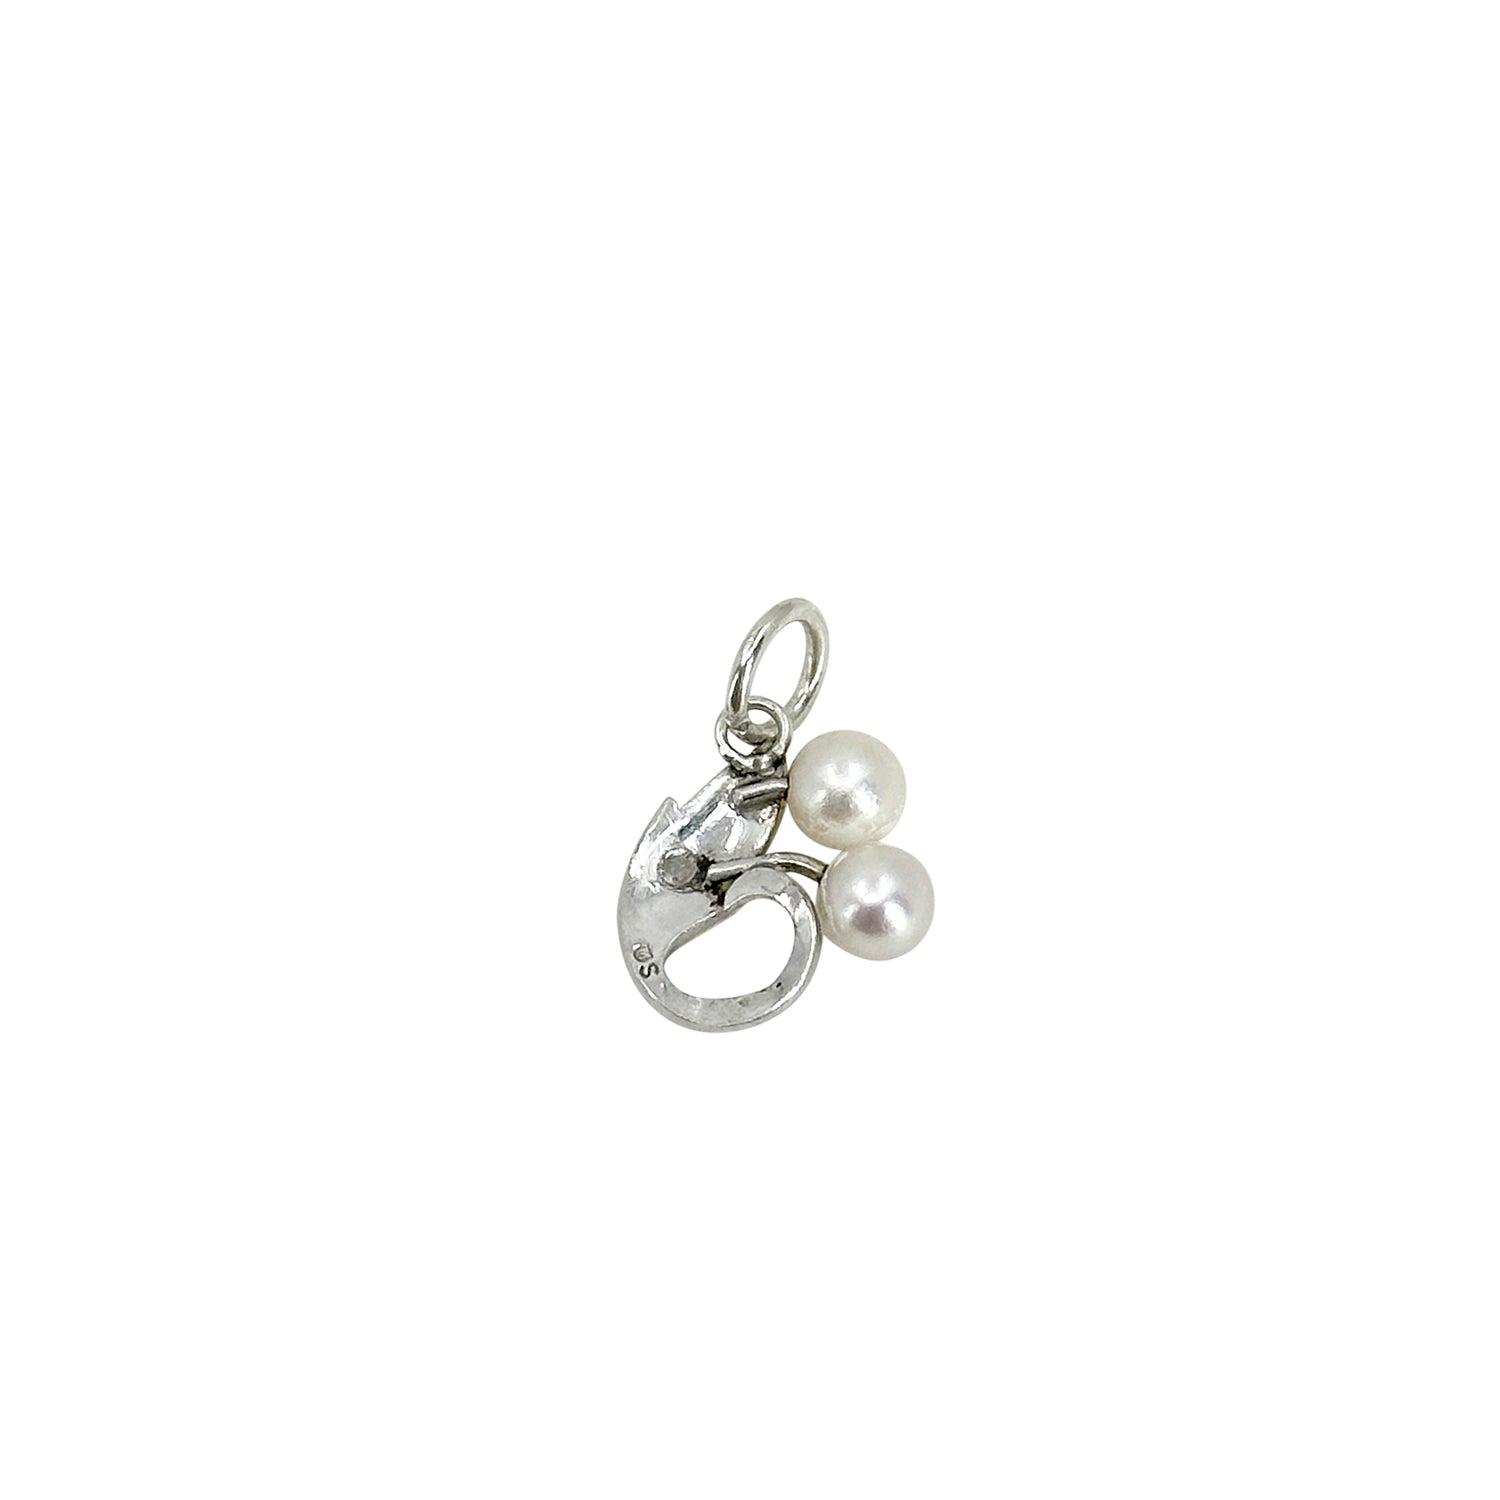 Petite Engraved Mikimoto Vintage Leaf Saltwater Akoya Cultured Pearl Conversion Pendant Charm- Sterling Silver